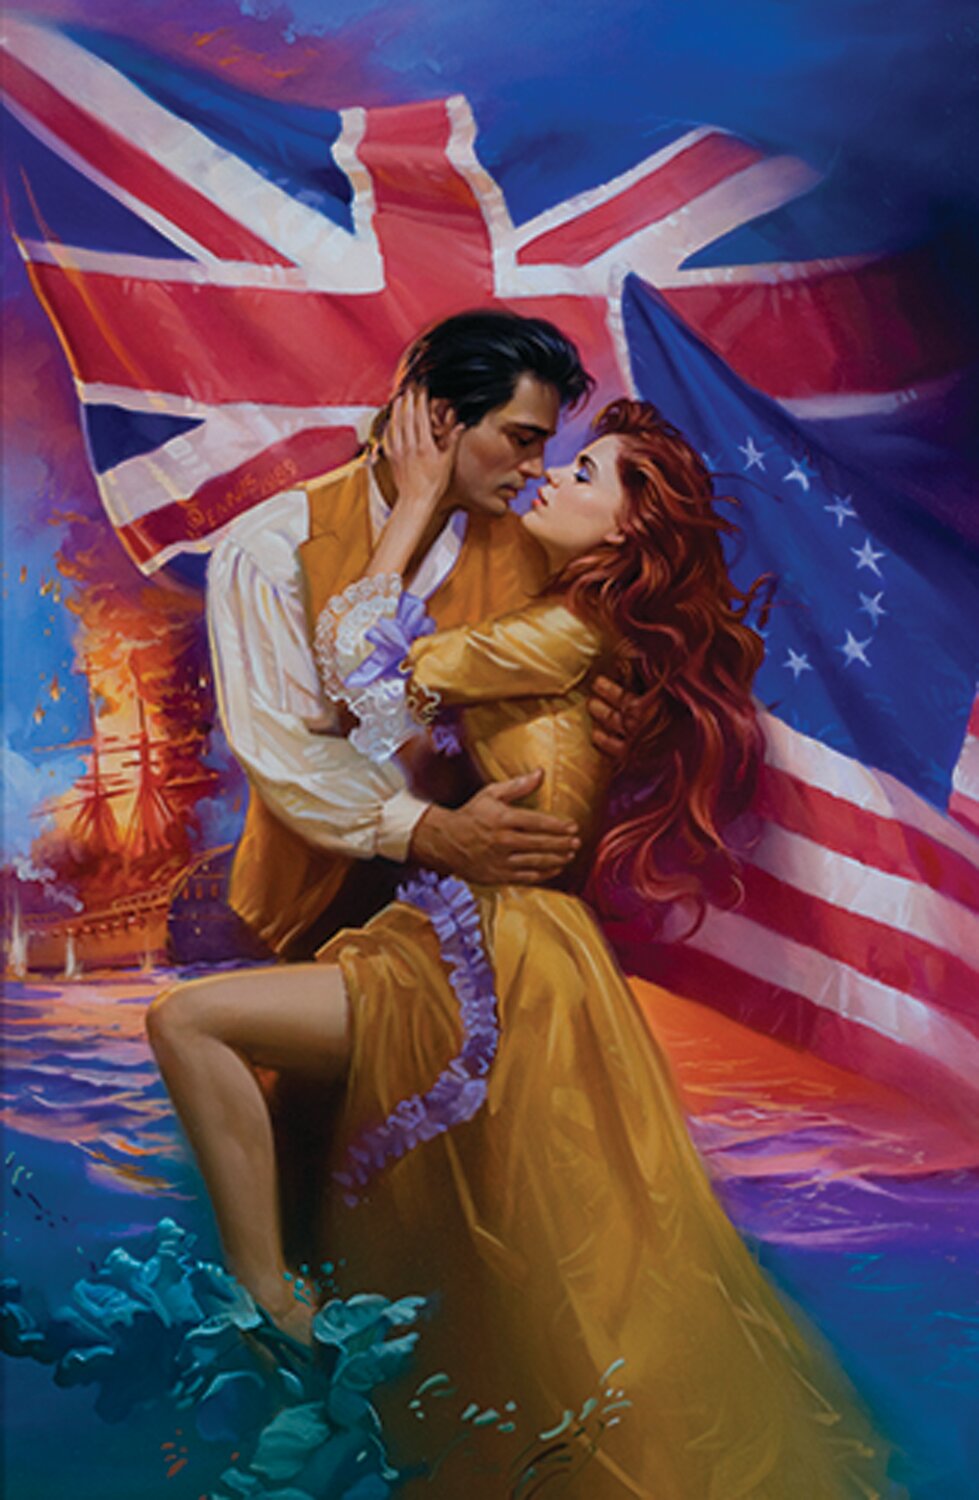 This romance novel cover is one example of the oil illustrations by John Ennis of Bucks County.